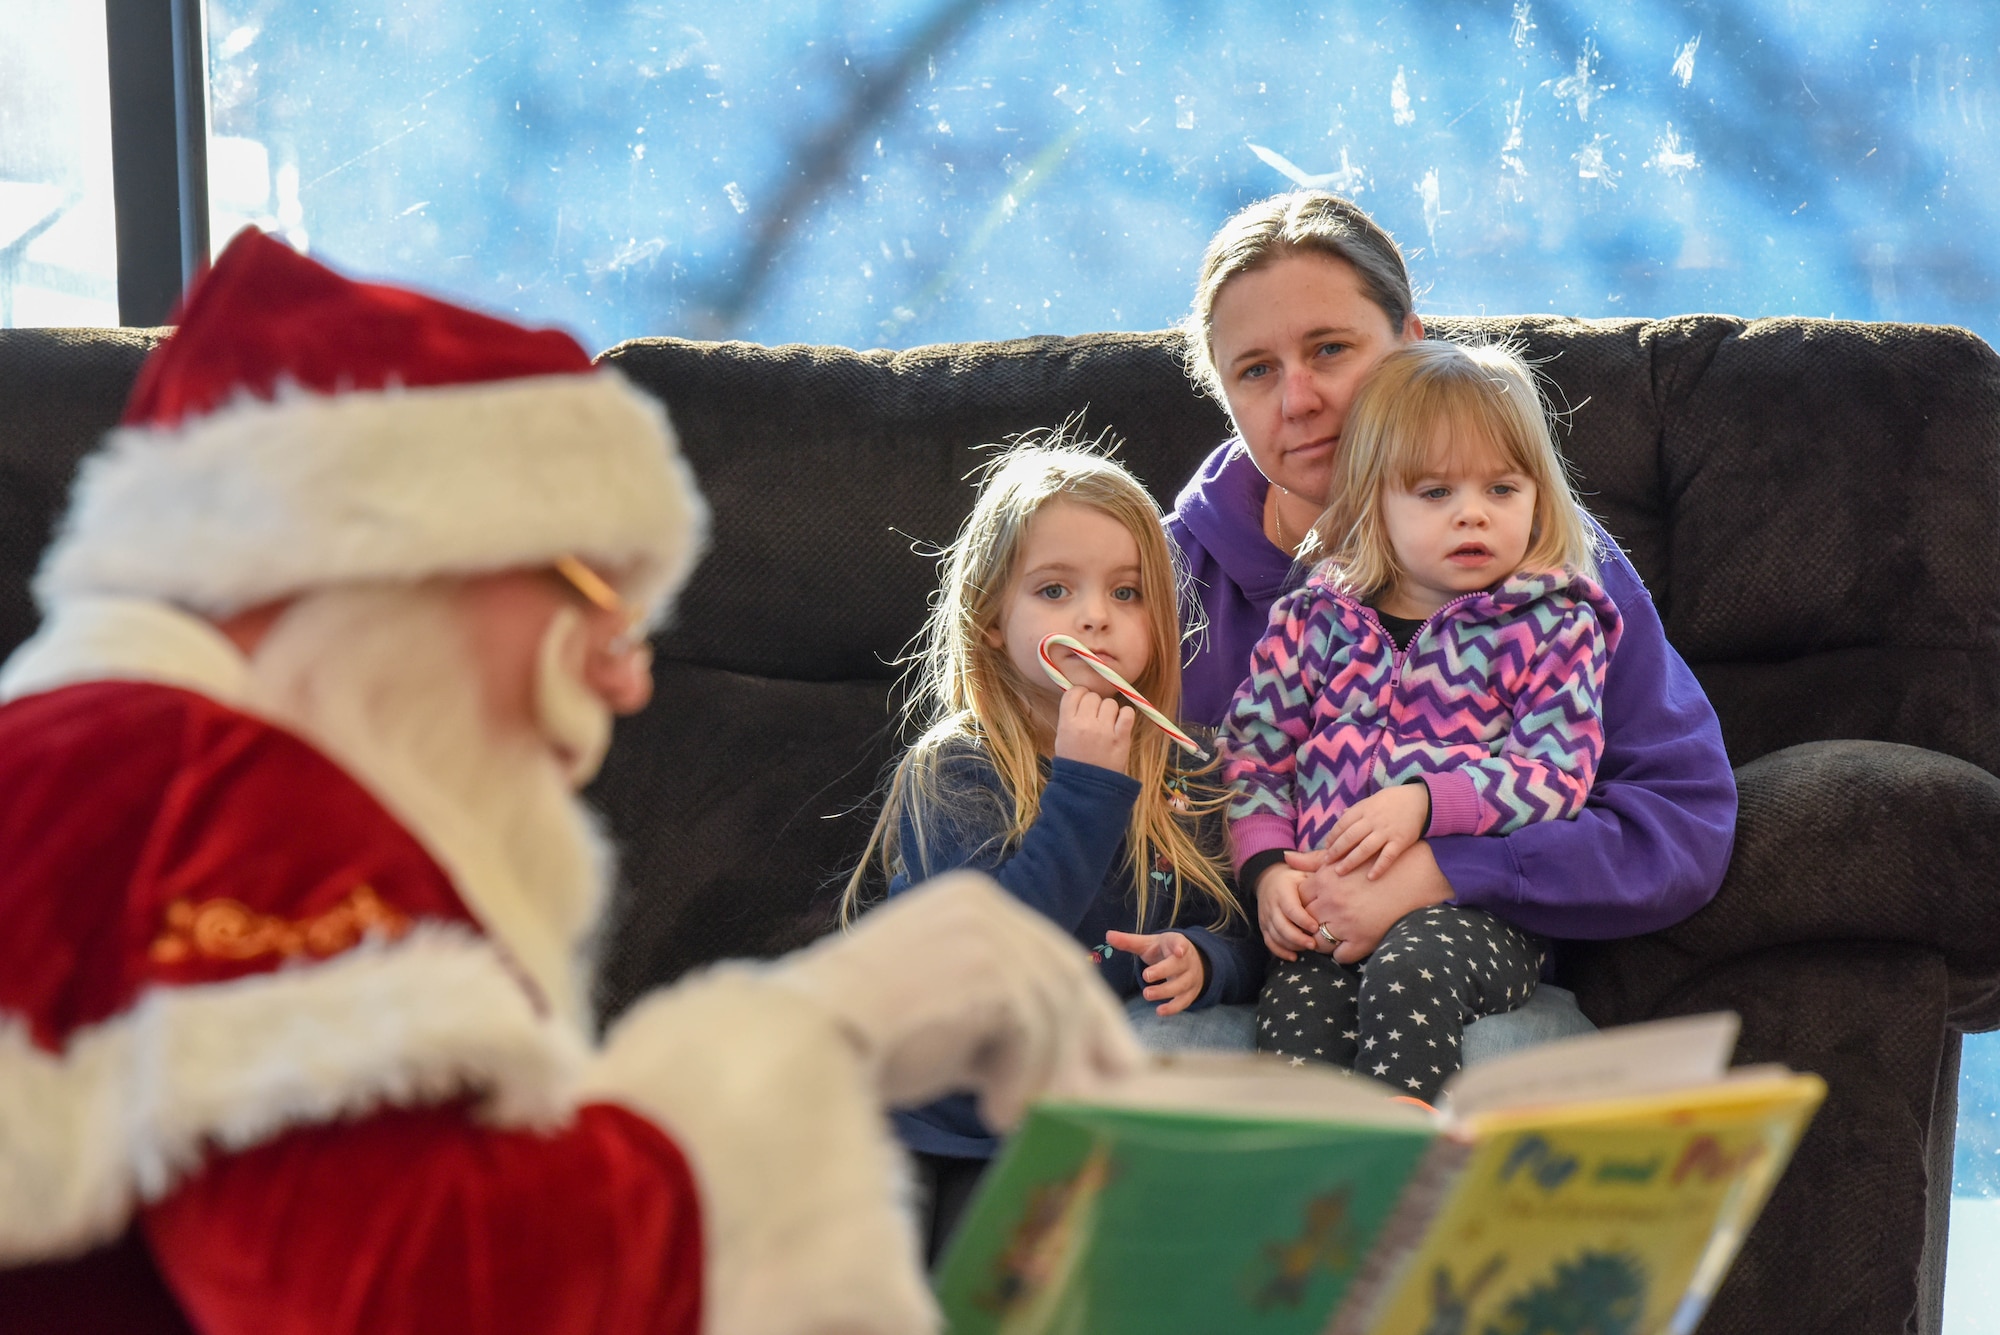 Santa Claus reads “Pip and Posy” to children in the Holbrook Library on Ellsworth Air Force Base, S.D., Dec. 13, 2018. Santa’s operations stretch across the globe, but even with his busy schedule, he still finds time to interact with children on a personal level. (U.S. Air Force photo by Tech. Sgt. Jette Carr)